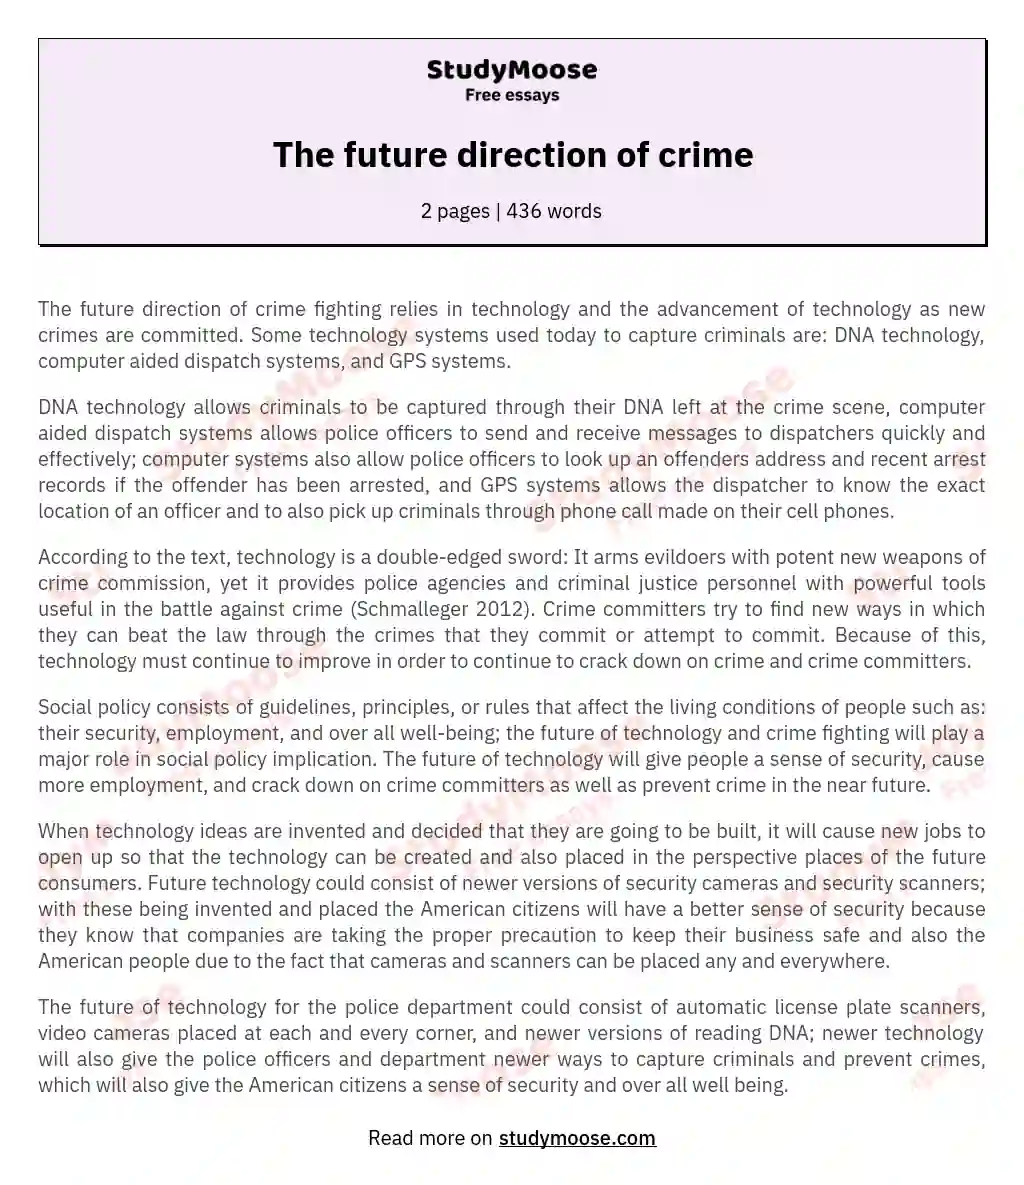 The future direction of crime essay